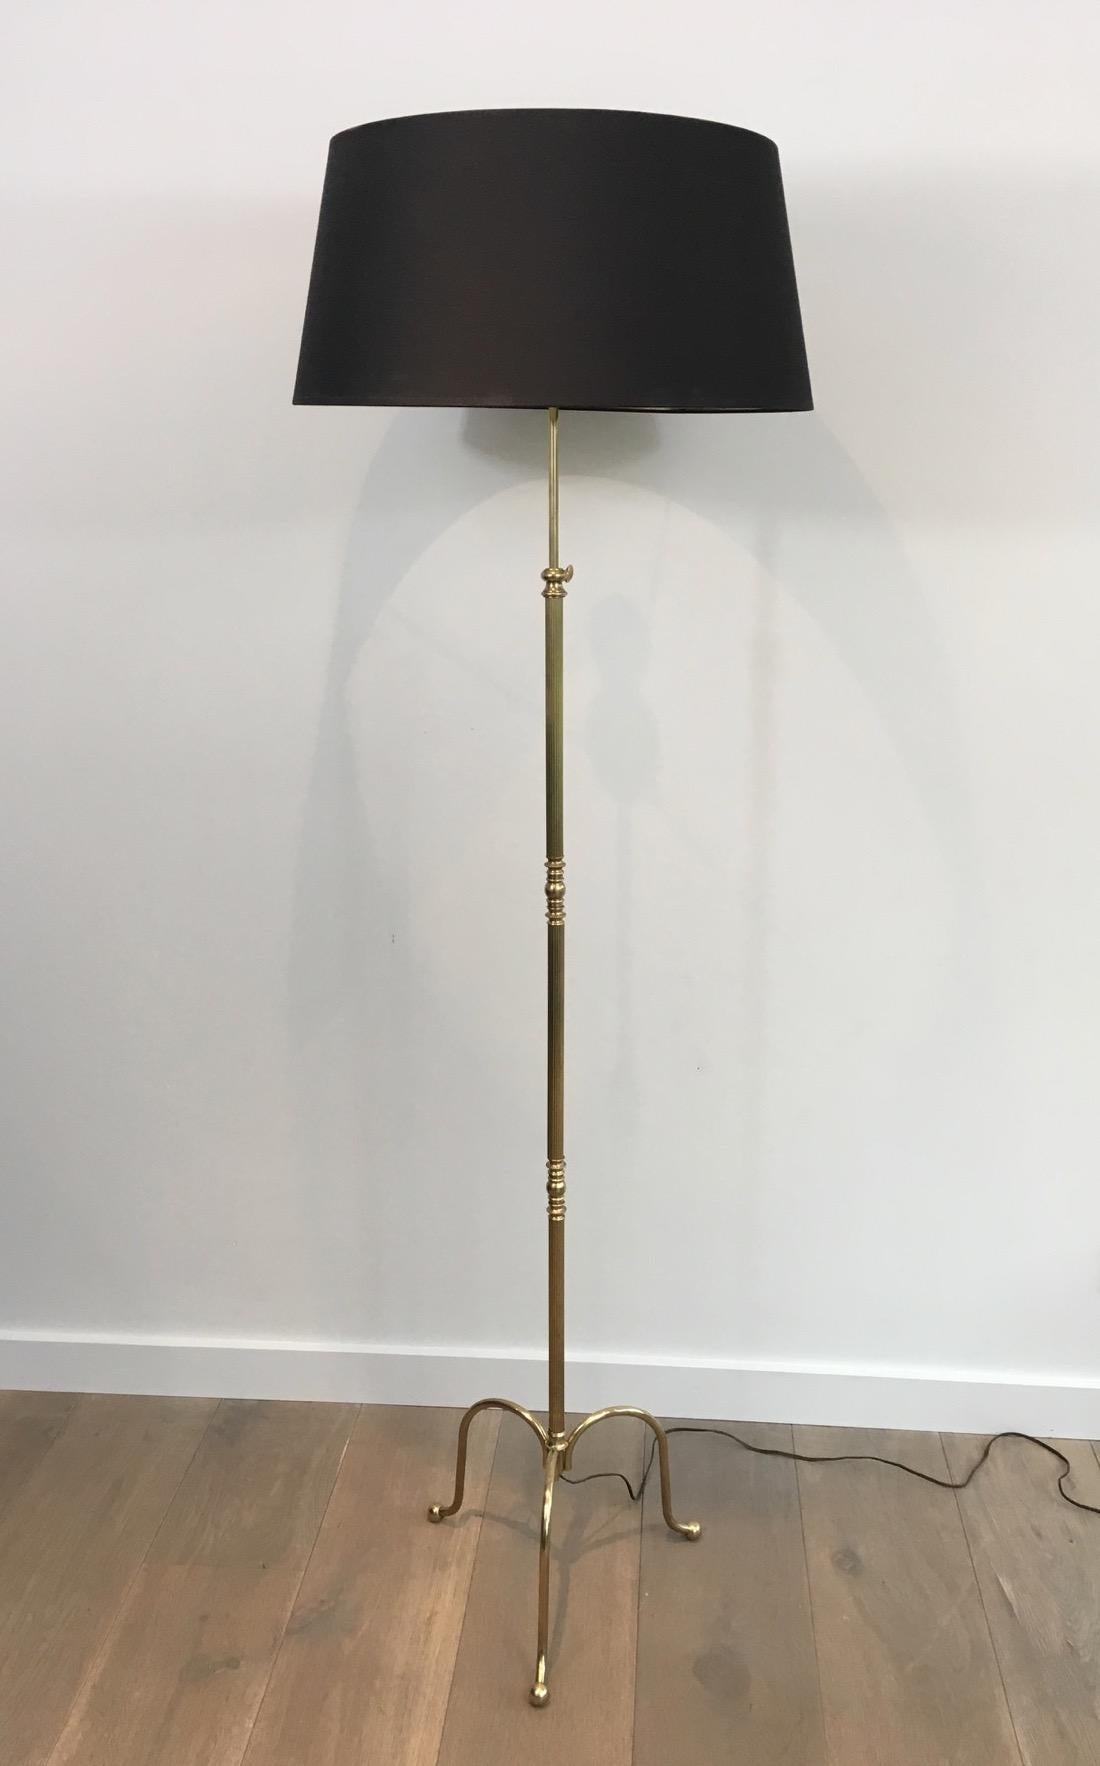 Neoclassical Ajustable Brass Floor Lamp with Tripode Base, circa 1940 For Sale 8